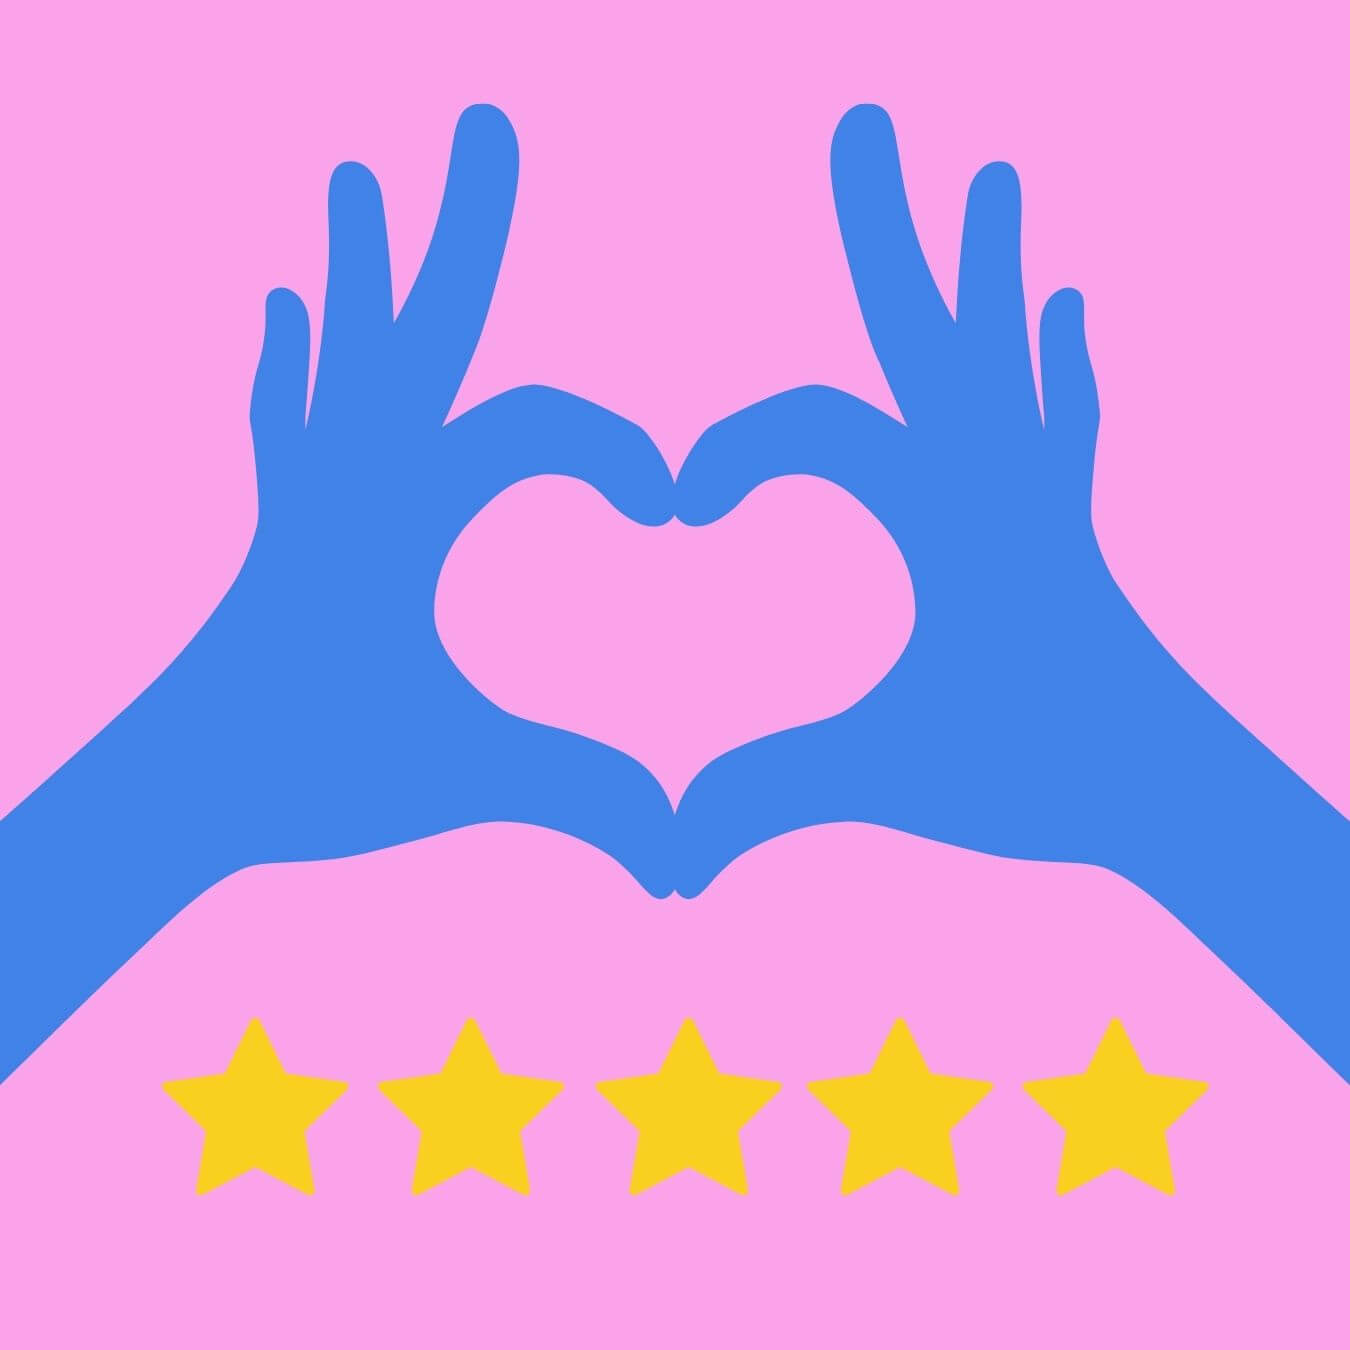 graphic of hands making a heart shape and 5 star rating for loudbird digital marketing services loudbird review and testimonials